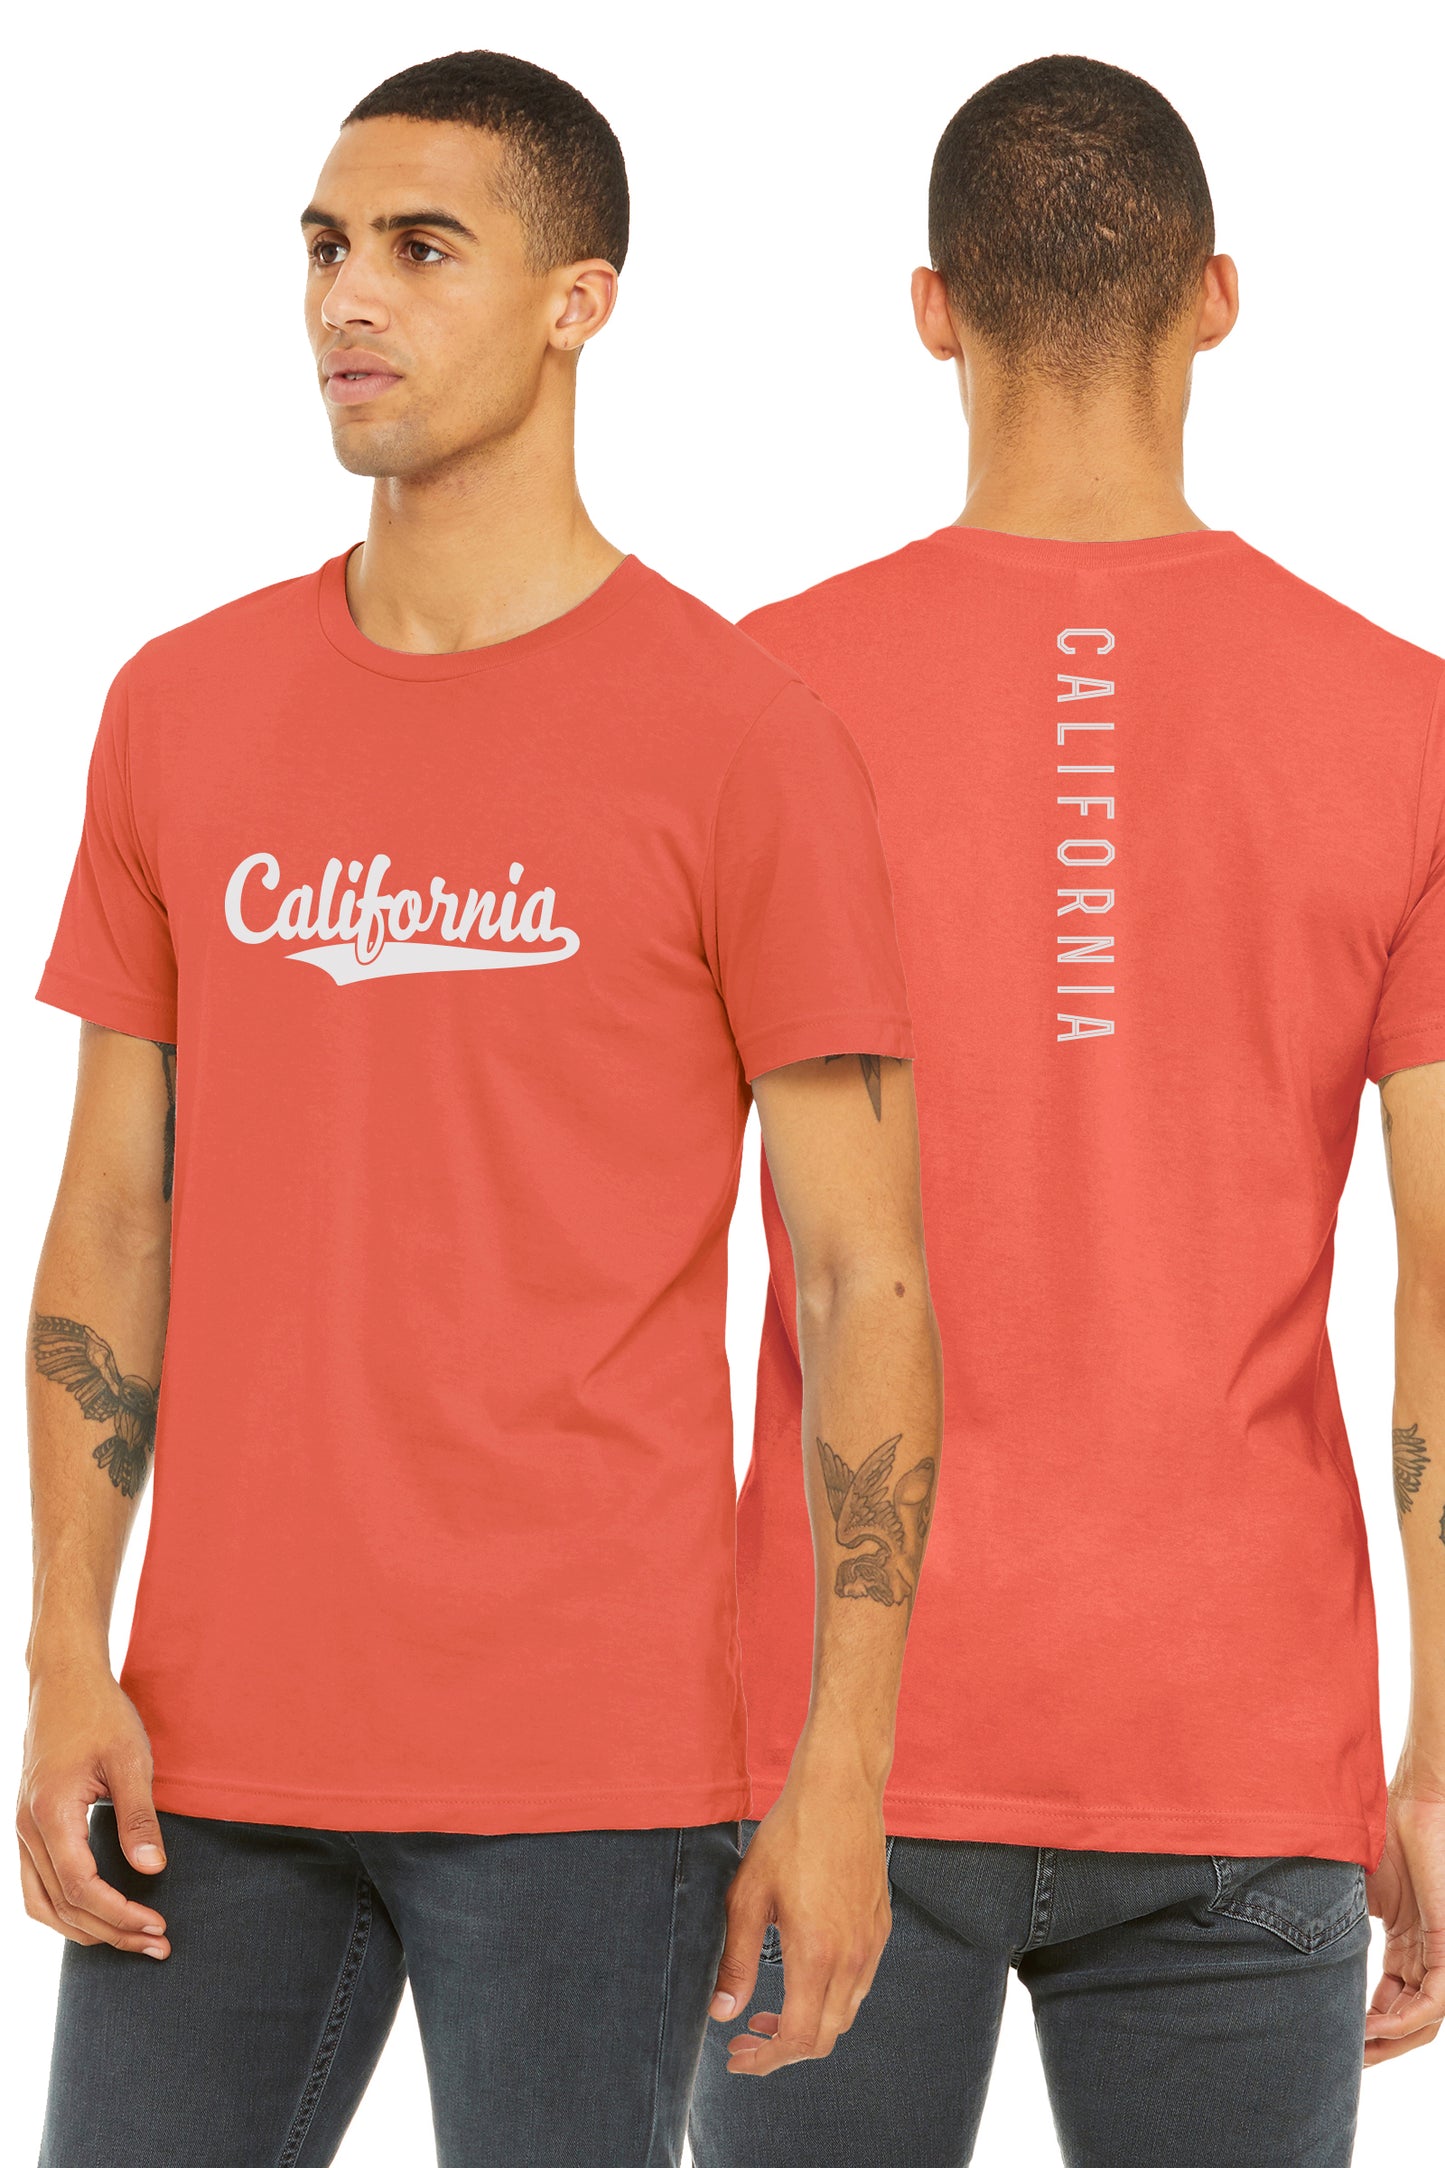 Daxton Adult Unisex Tshirt California Script with Vertical on the Back